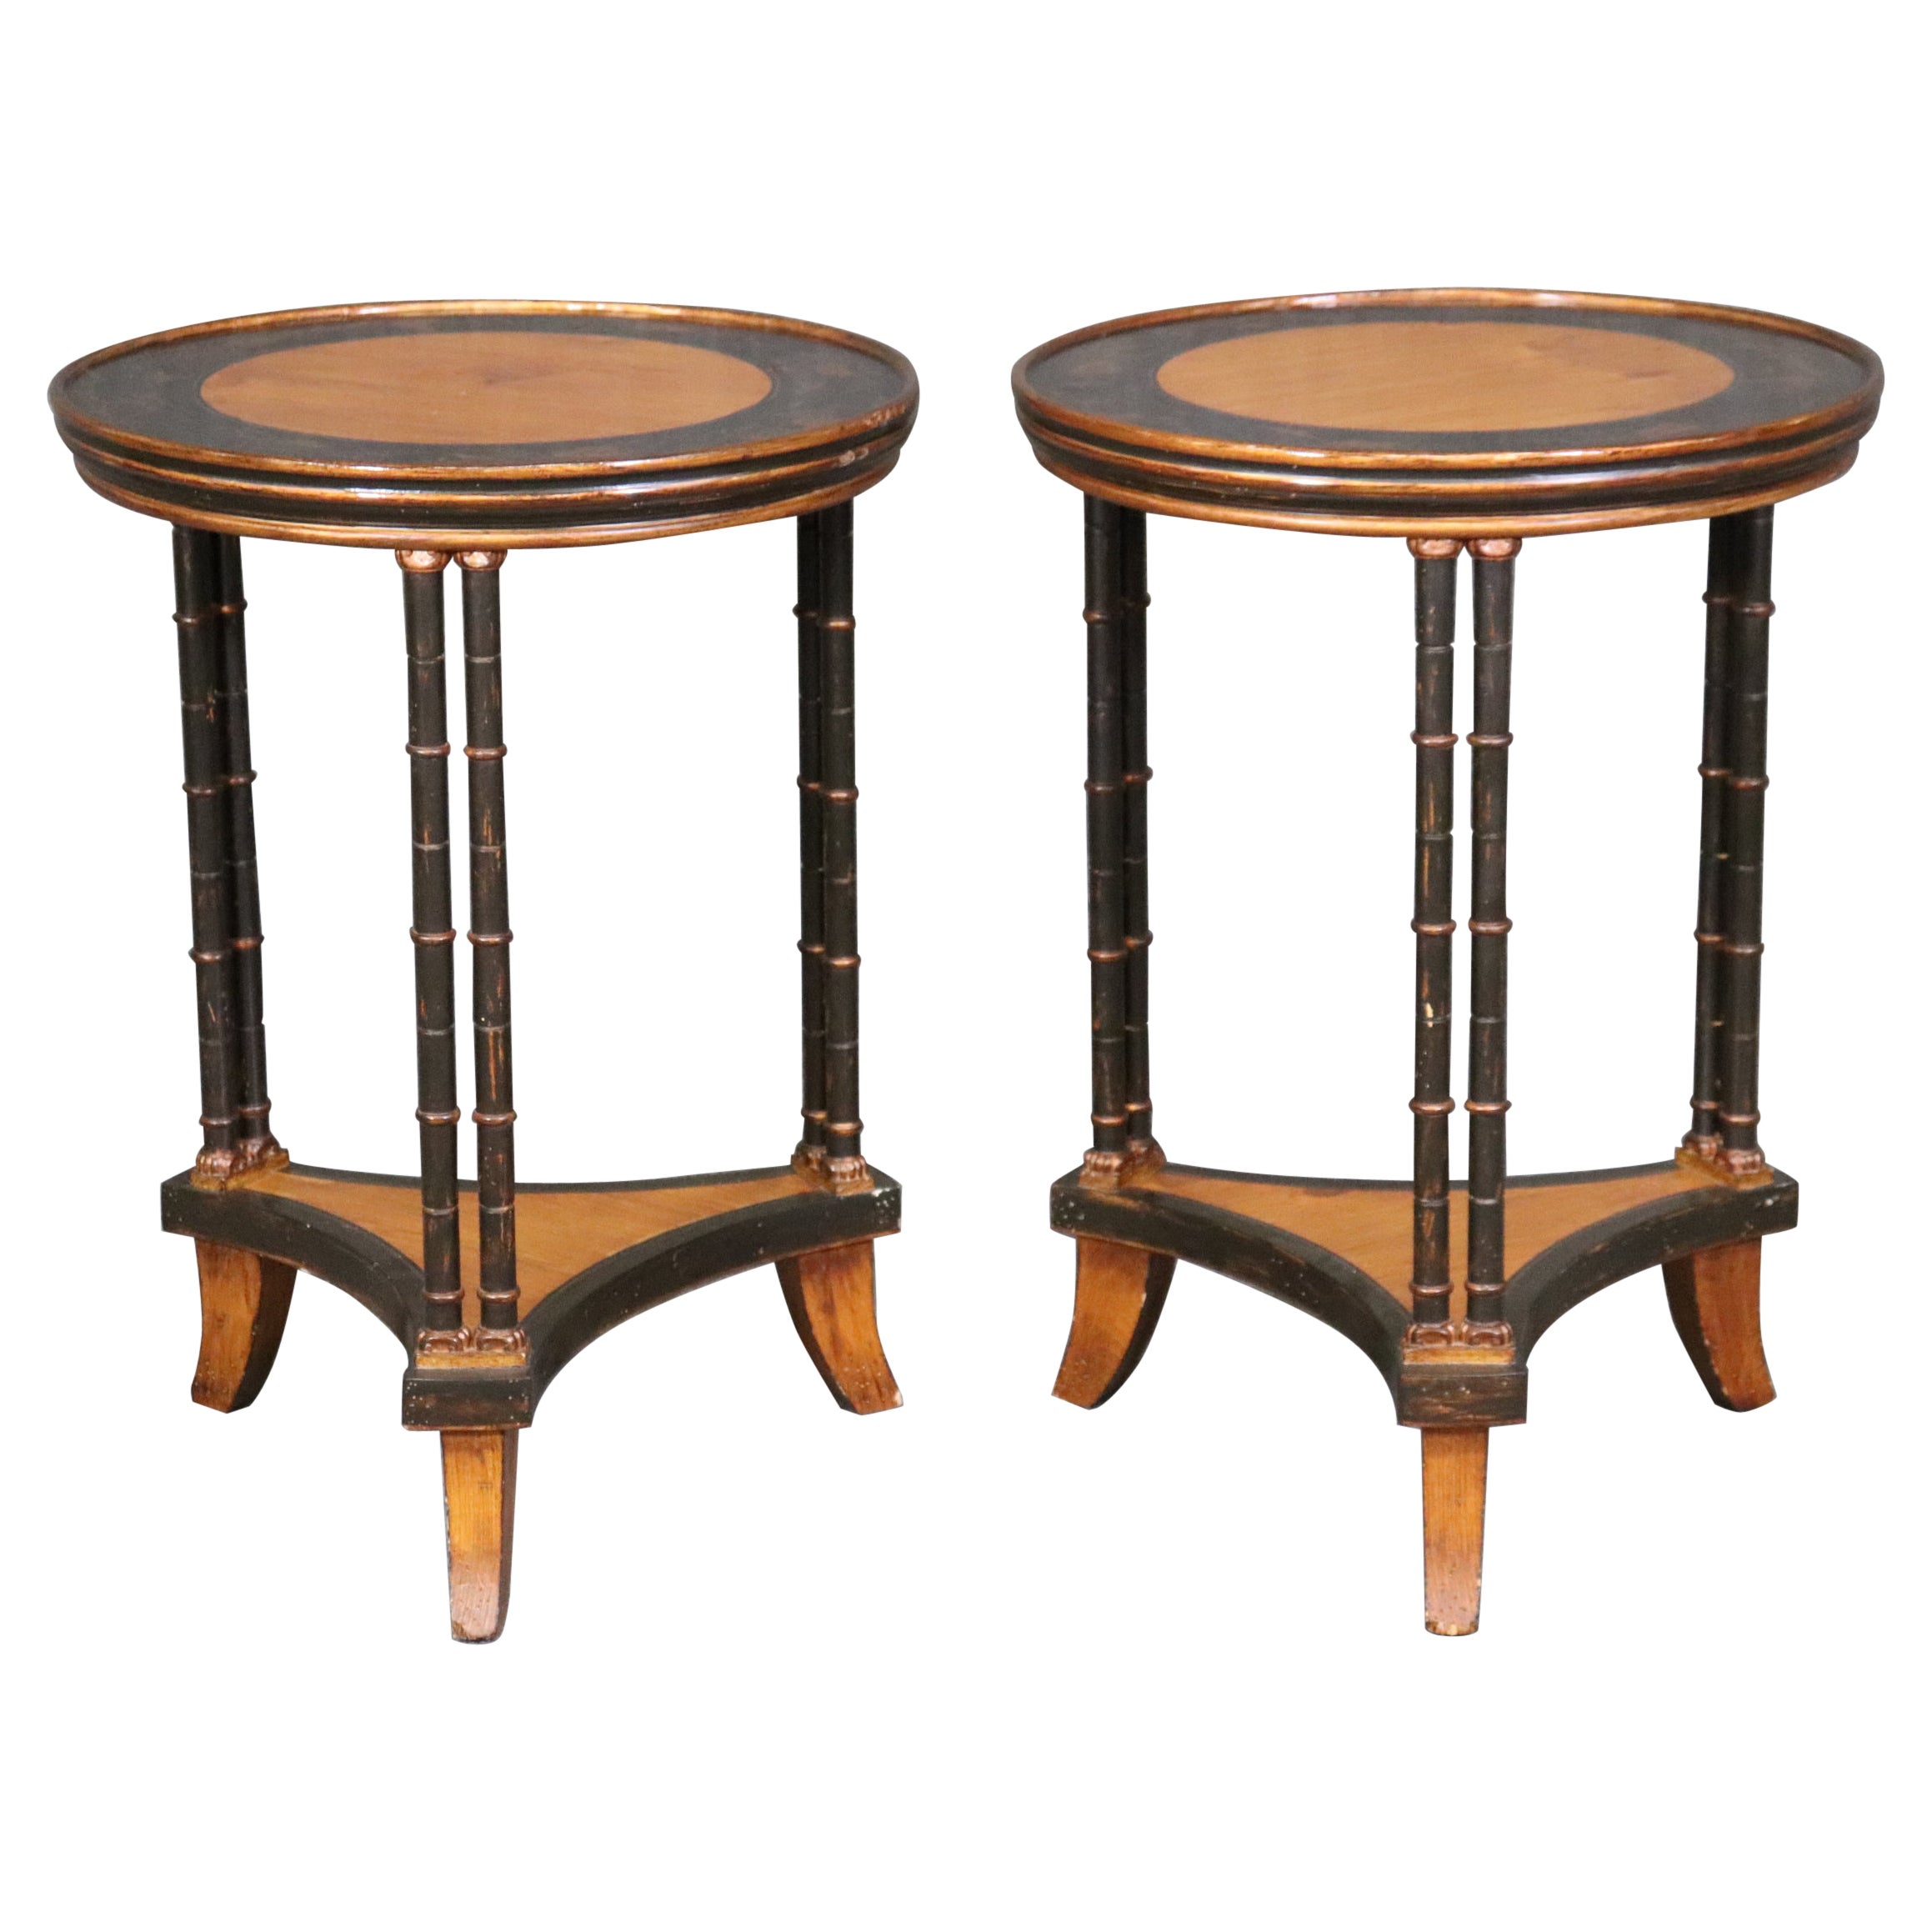 Pair of Chinoiserie Painted Faux Bamboo Yew Wood Gueridon Side Tables  For Sale